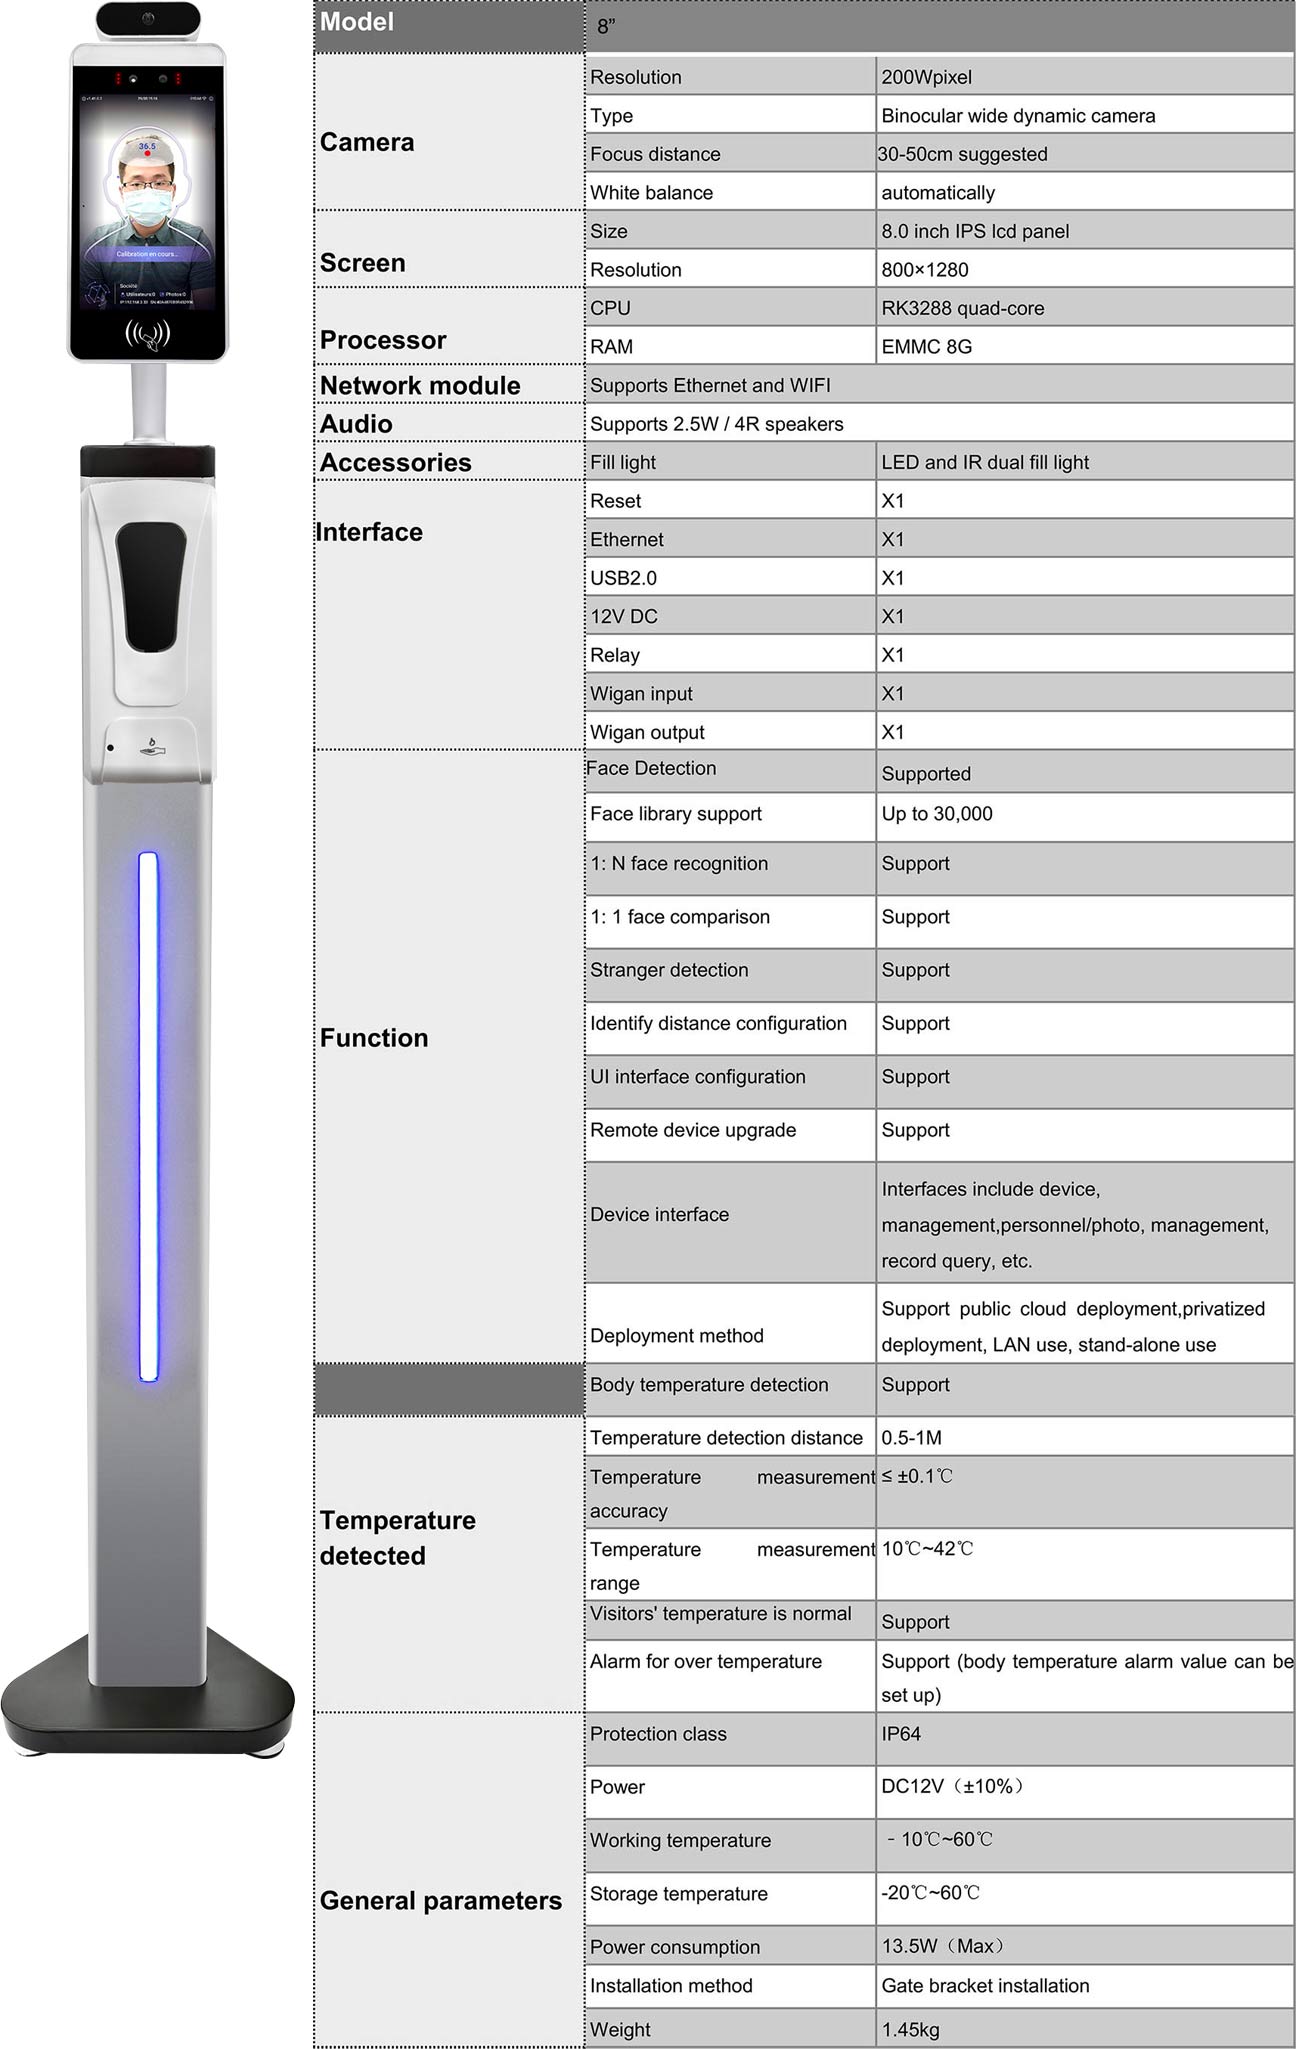 Temperature Check Kiosk 8 inch Specifications